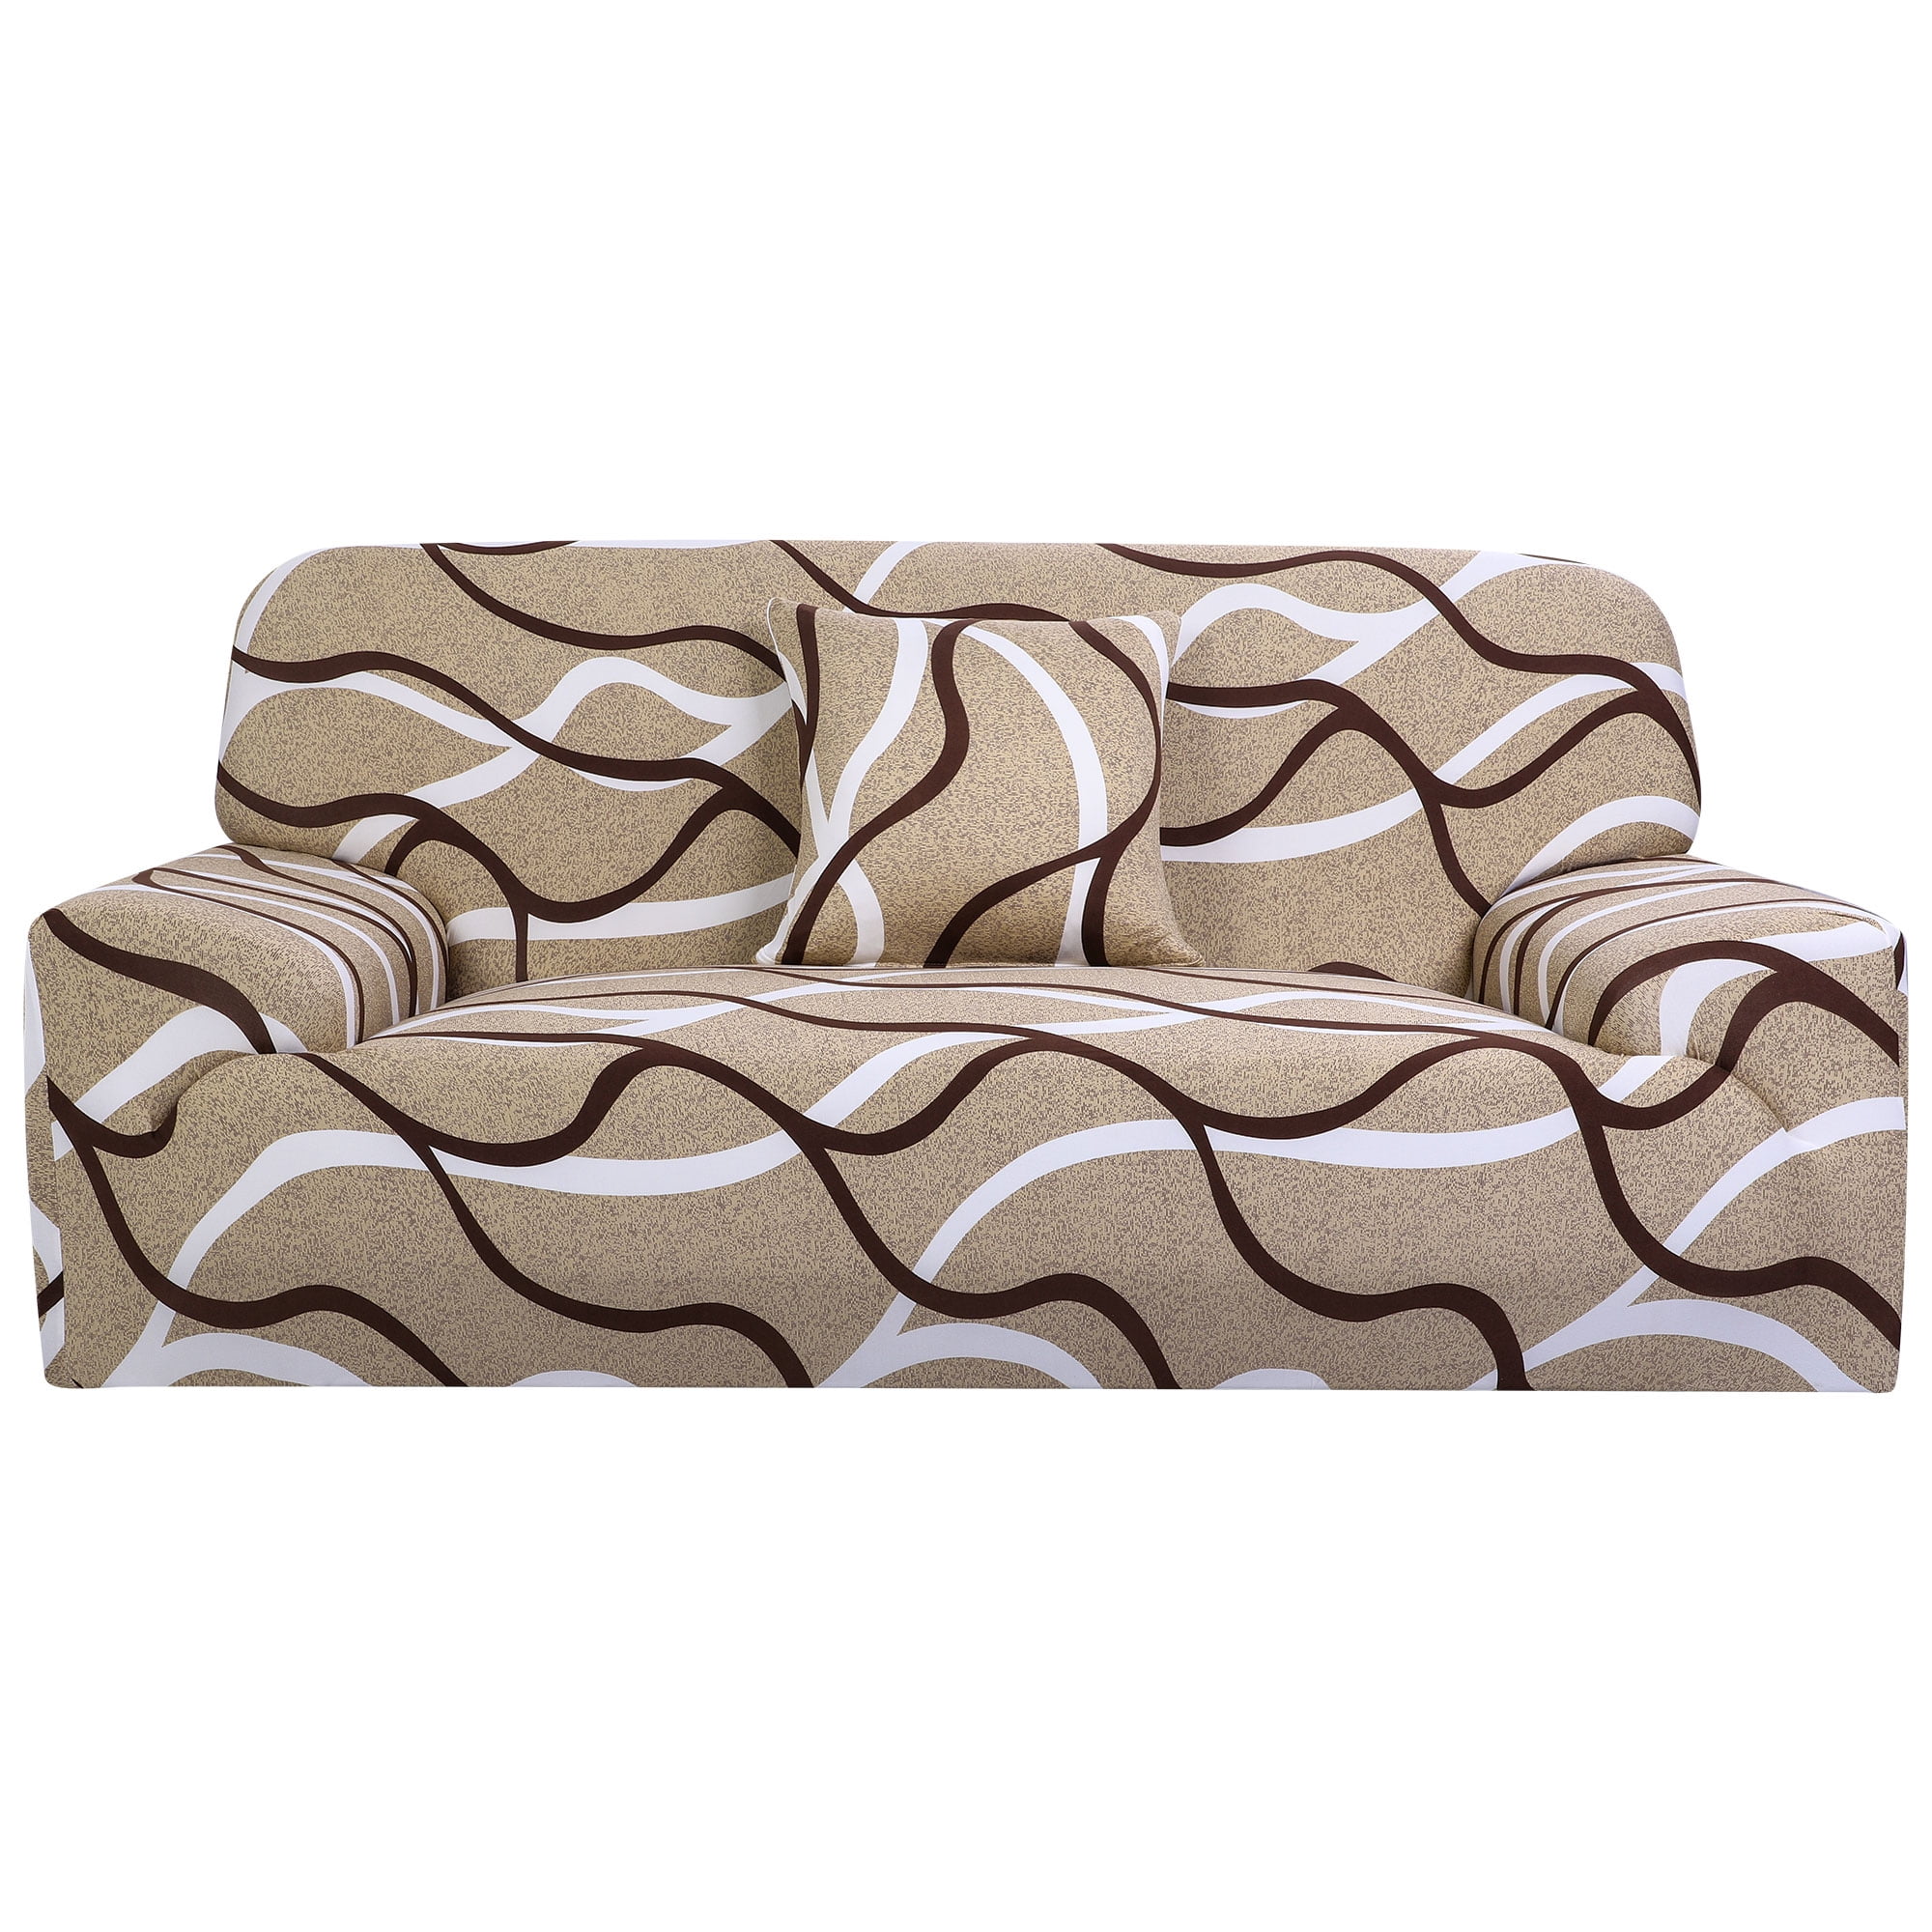 Details about   Non-slip Sofa Cover Protector Stretch Corner  Cushion Sofa Towel 1/2/3/4-seater 